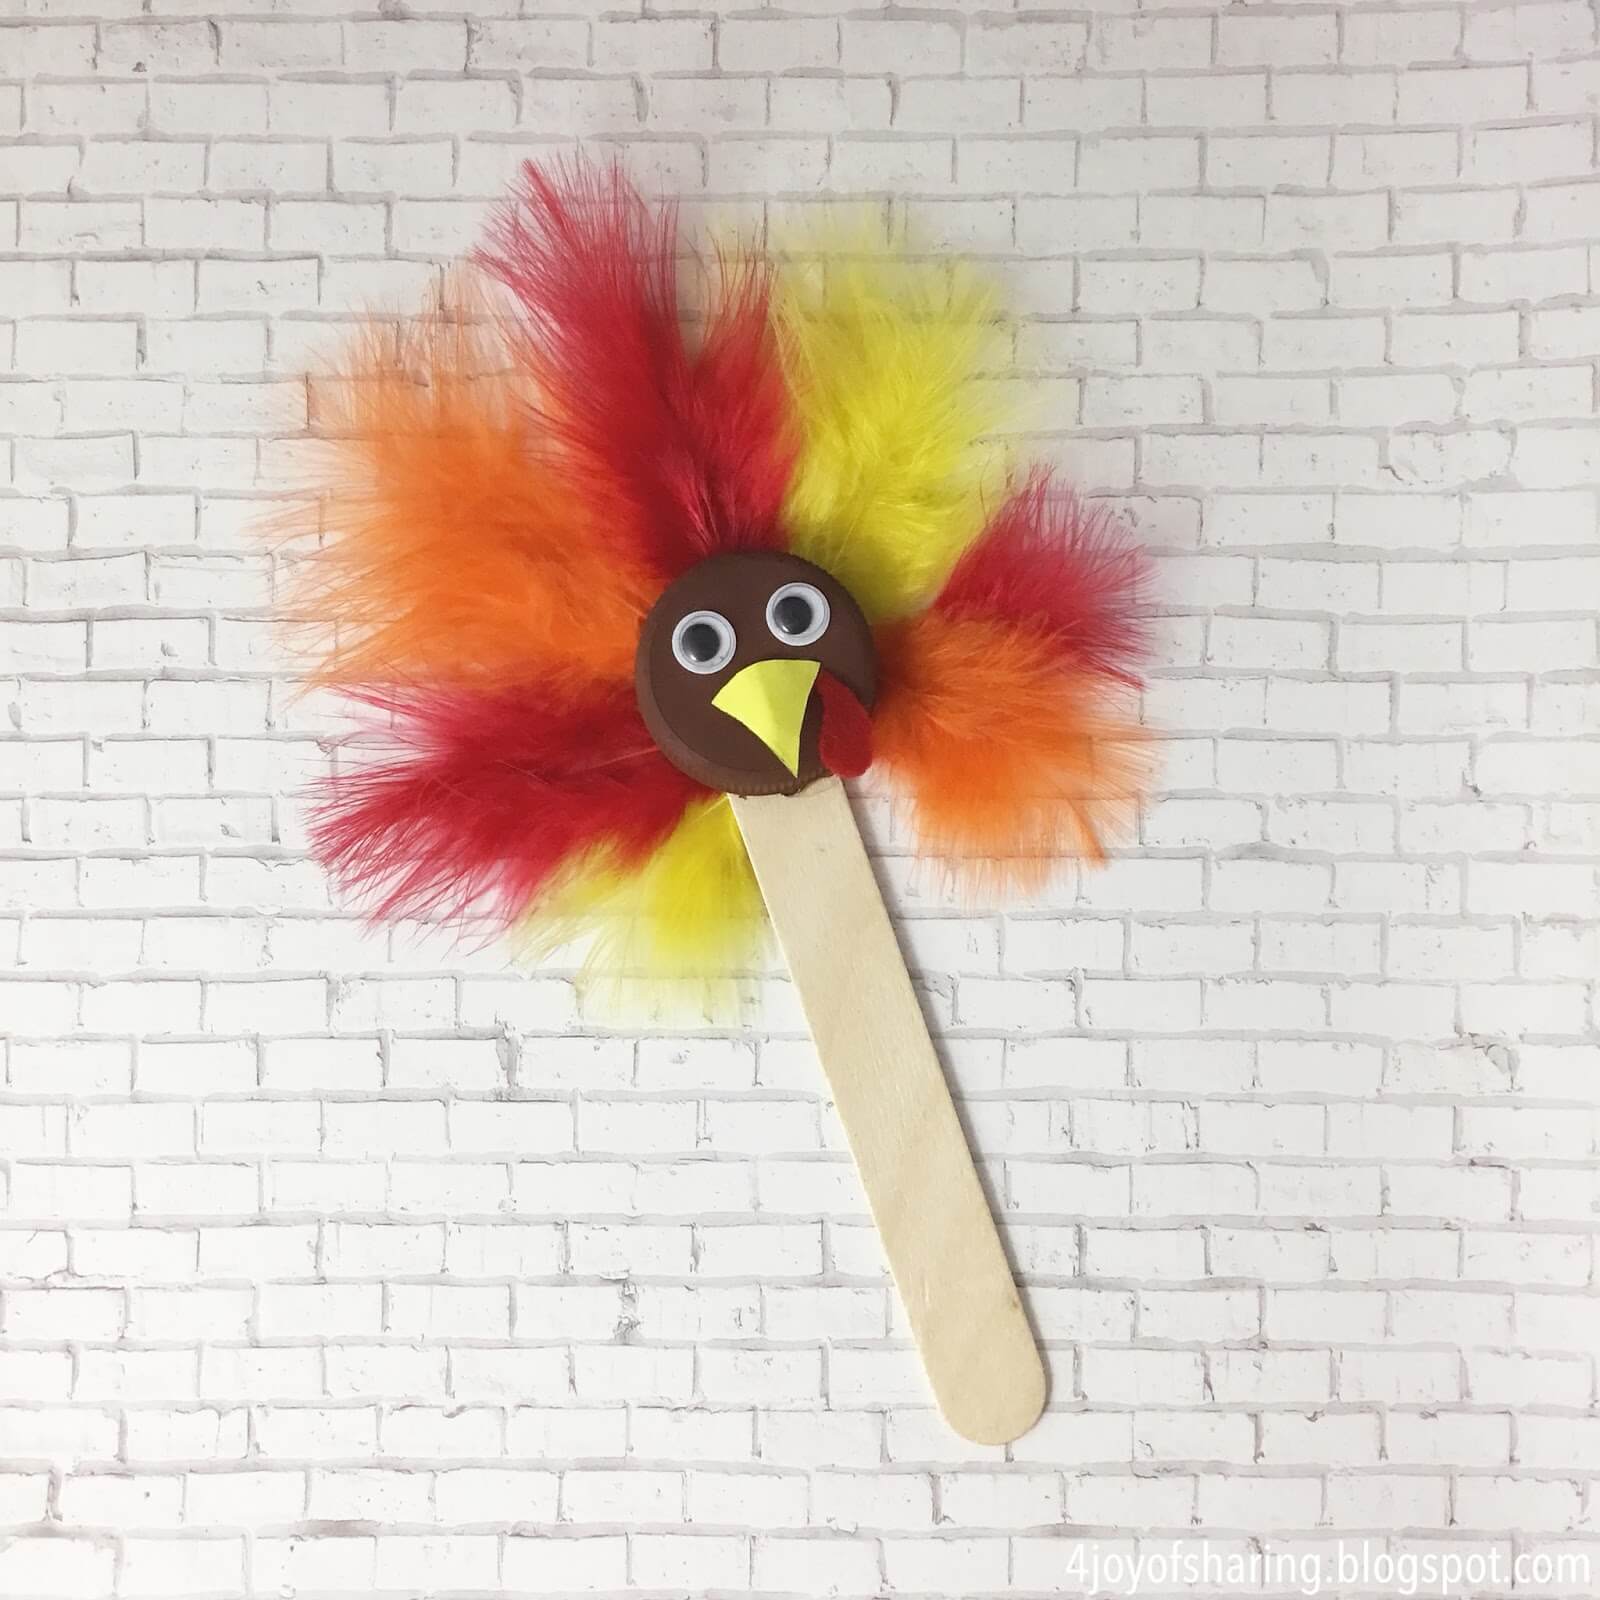 Let's Make A Cute Turkey Craft Using Feathers & Popsicle Sticks